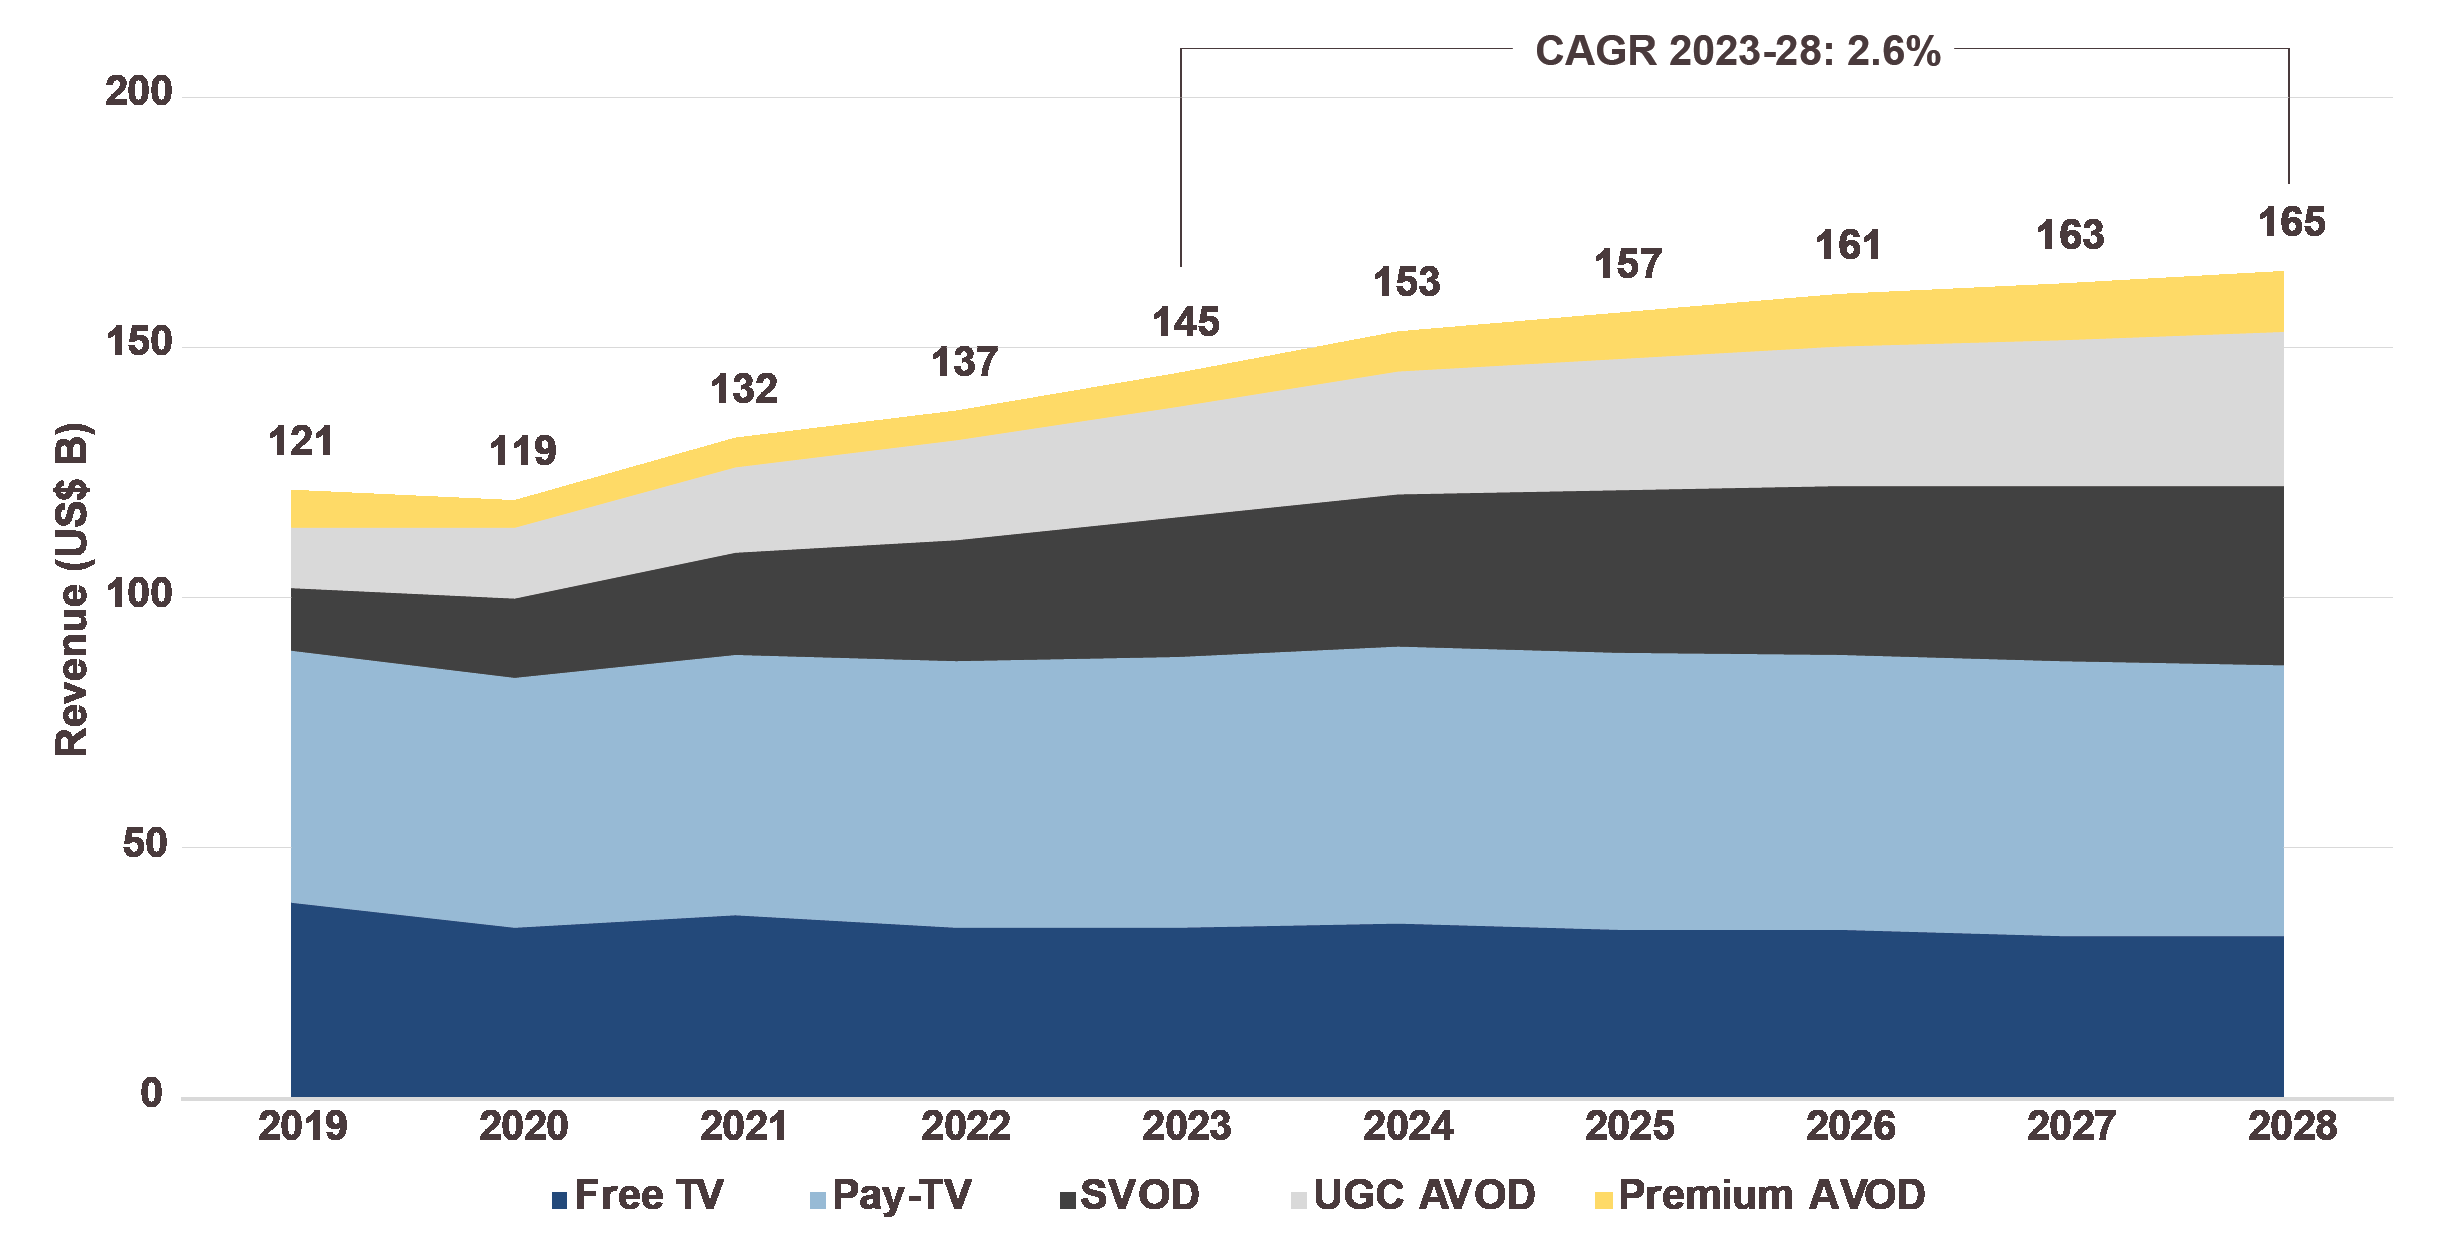 Asia Pacific Video Industry Revenue By Category - Free TV, Pay-TV, SVOD, UGC AVOD, Premium AVOD - 2029-2028